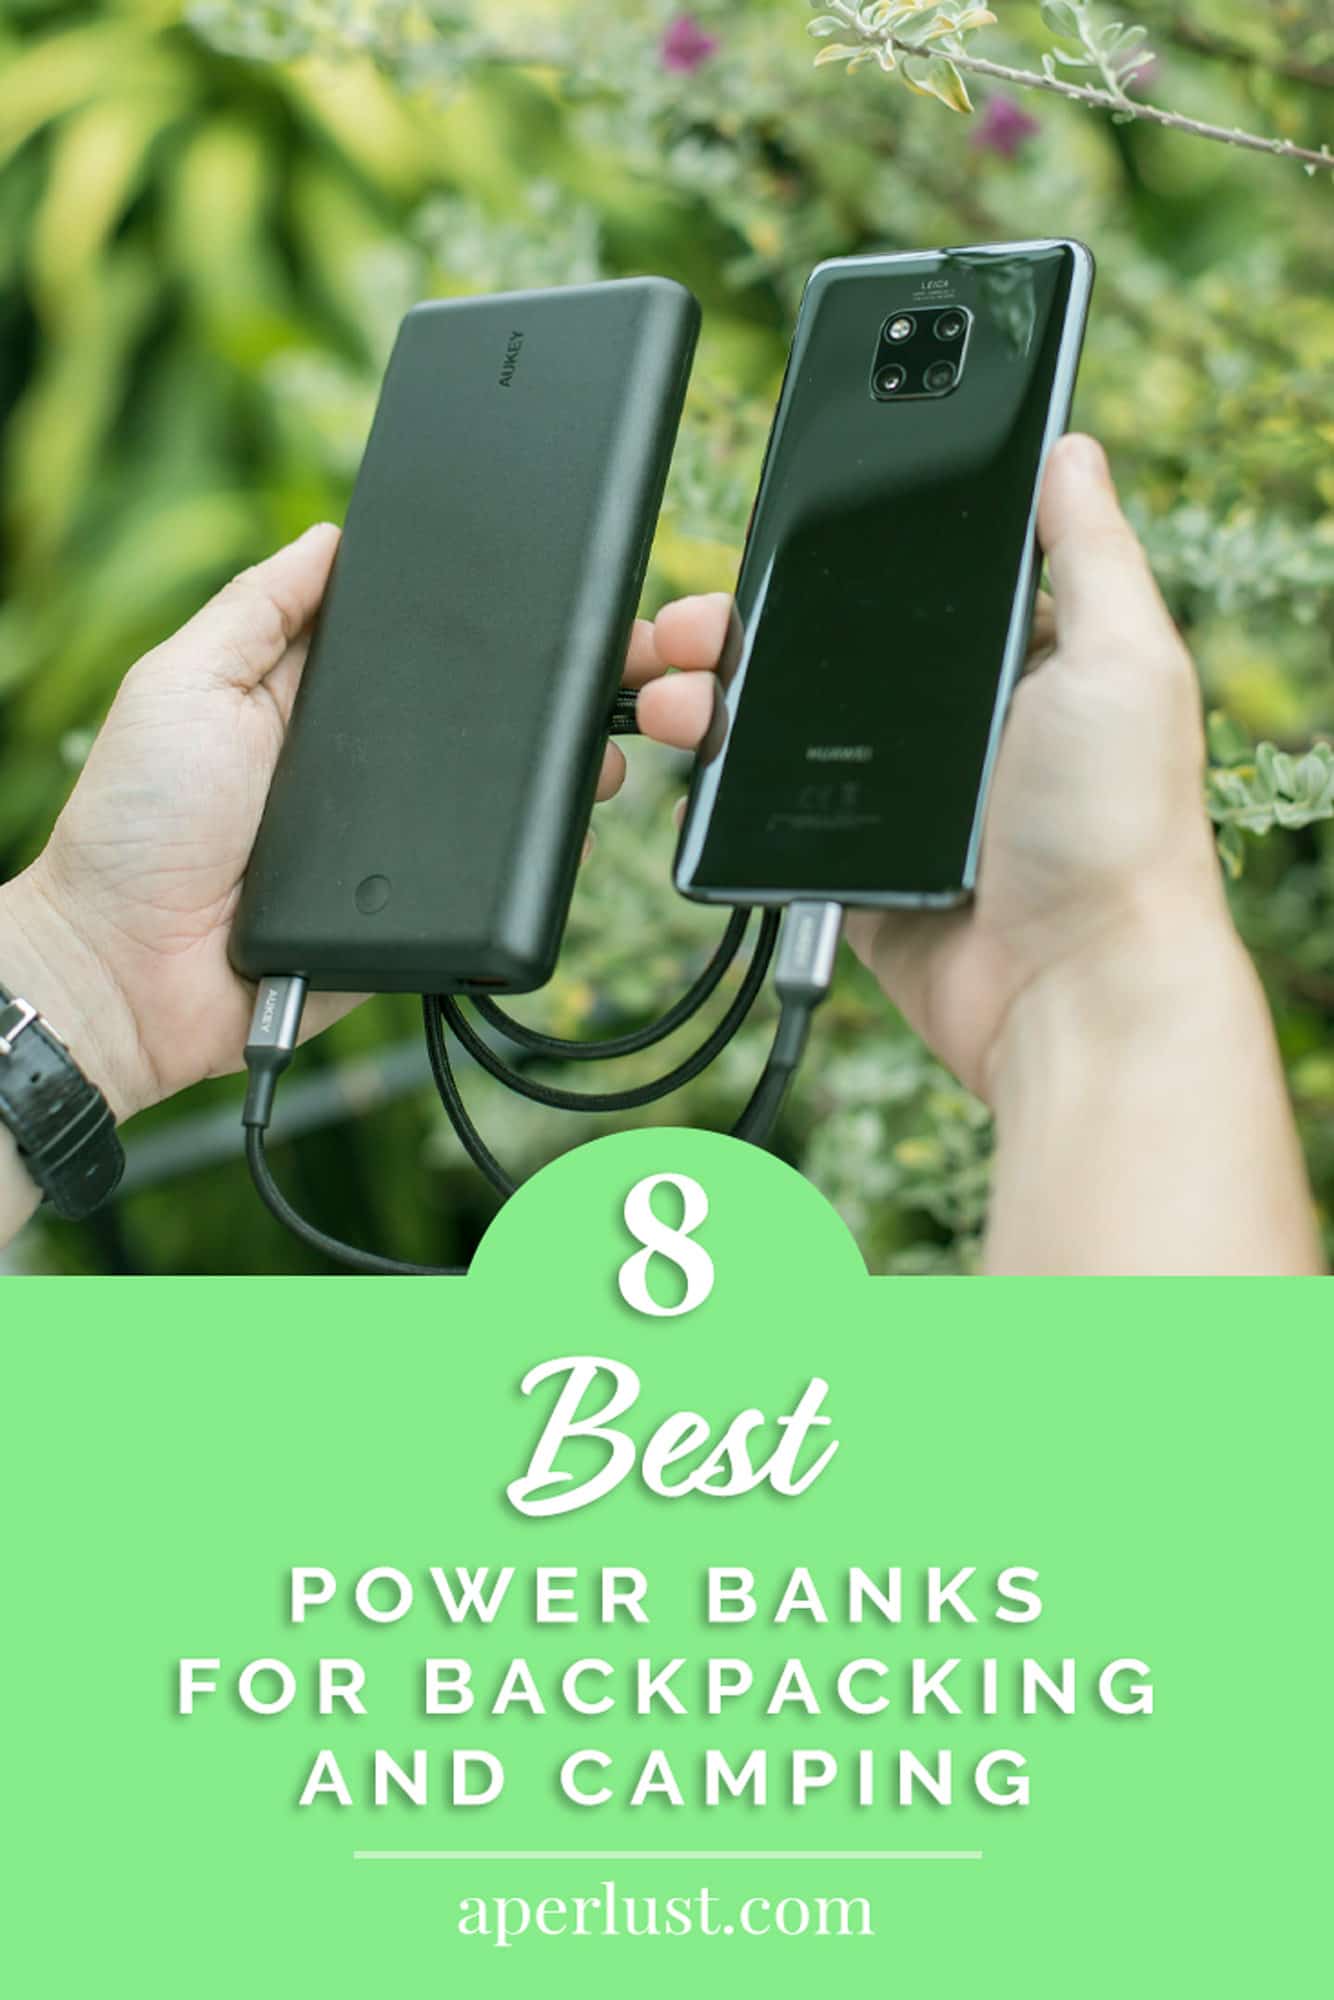 8 best power banks for backpacking and camping Pinterest Pin